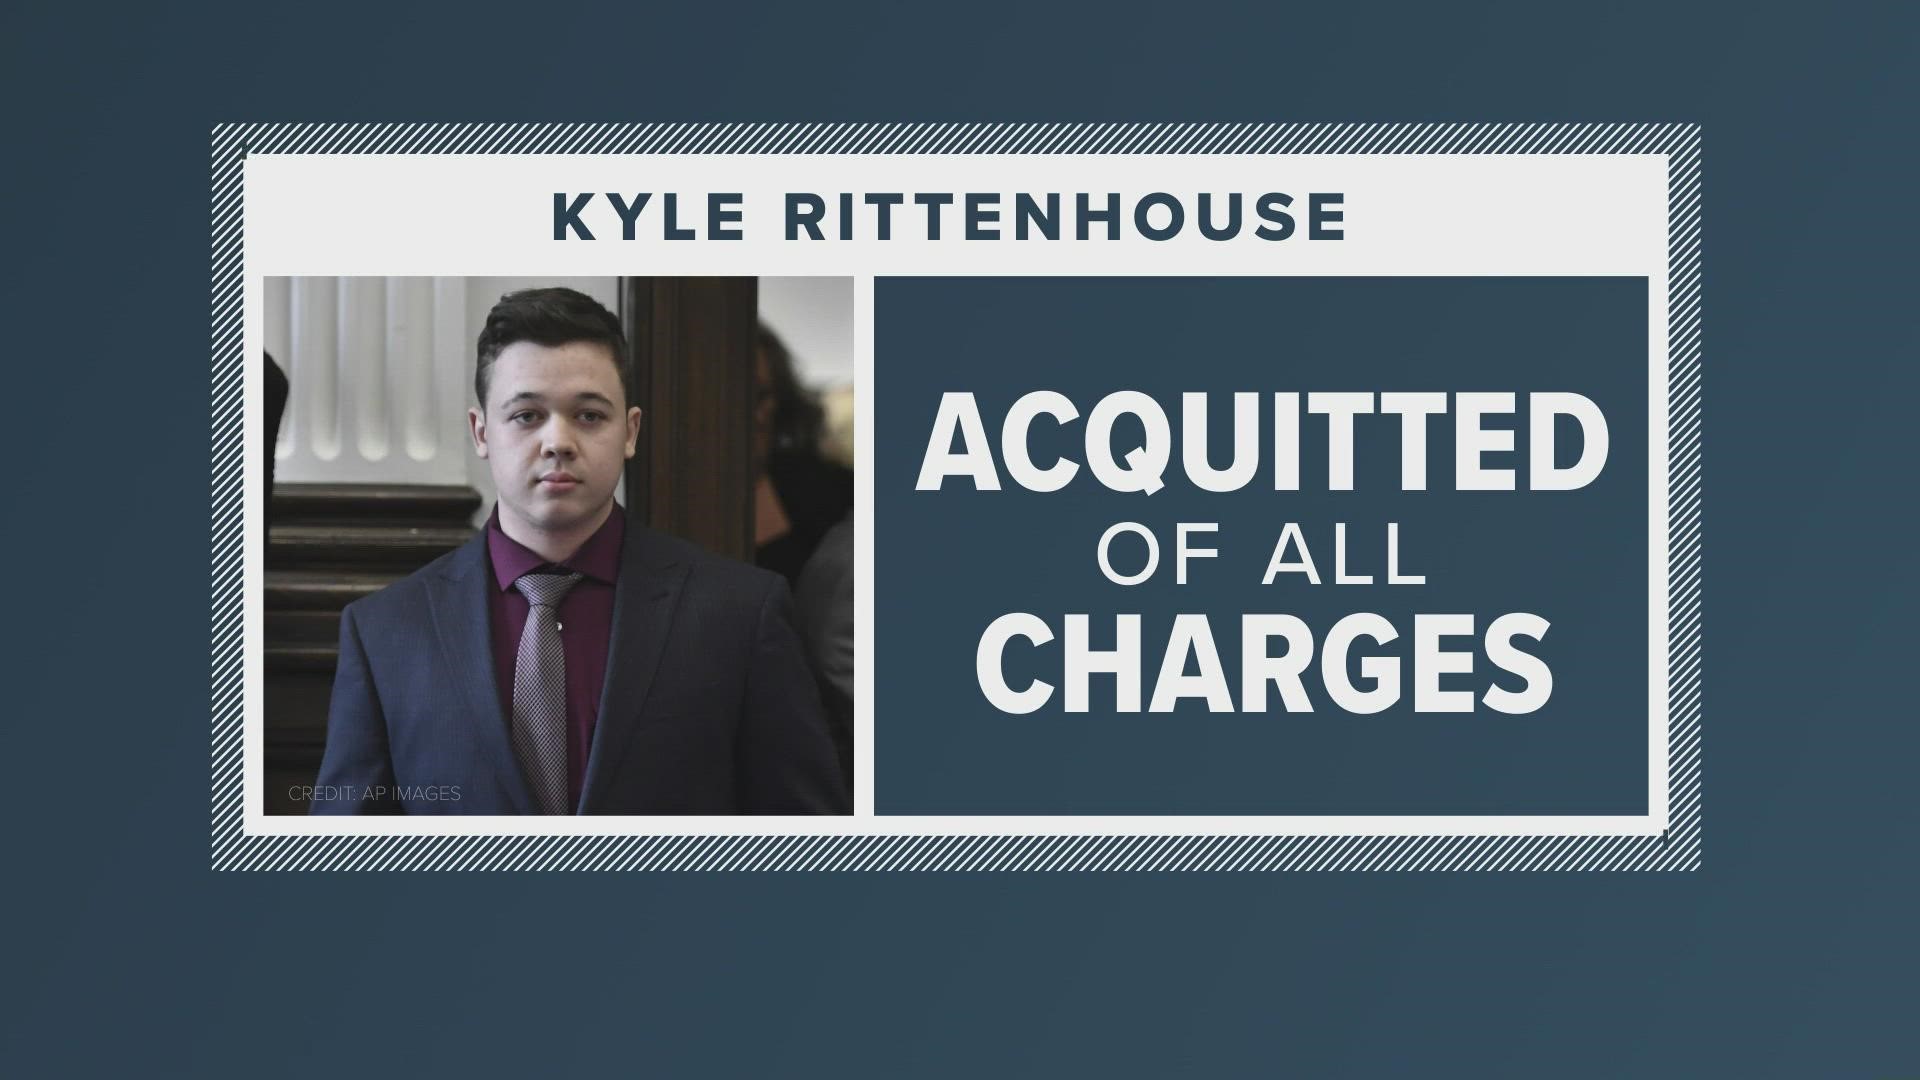 The Rittenhouse verdict was announced Friday. Kyle Rittenhouse was found not guilty on all five charges after killing two people and injuring another at a BLM rally.